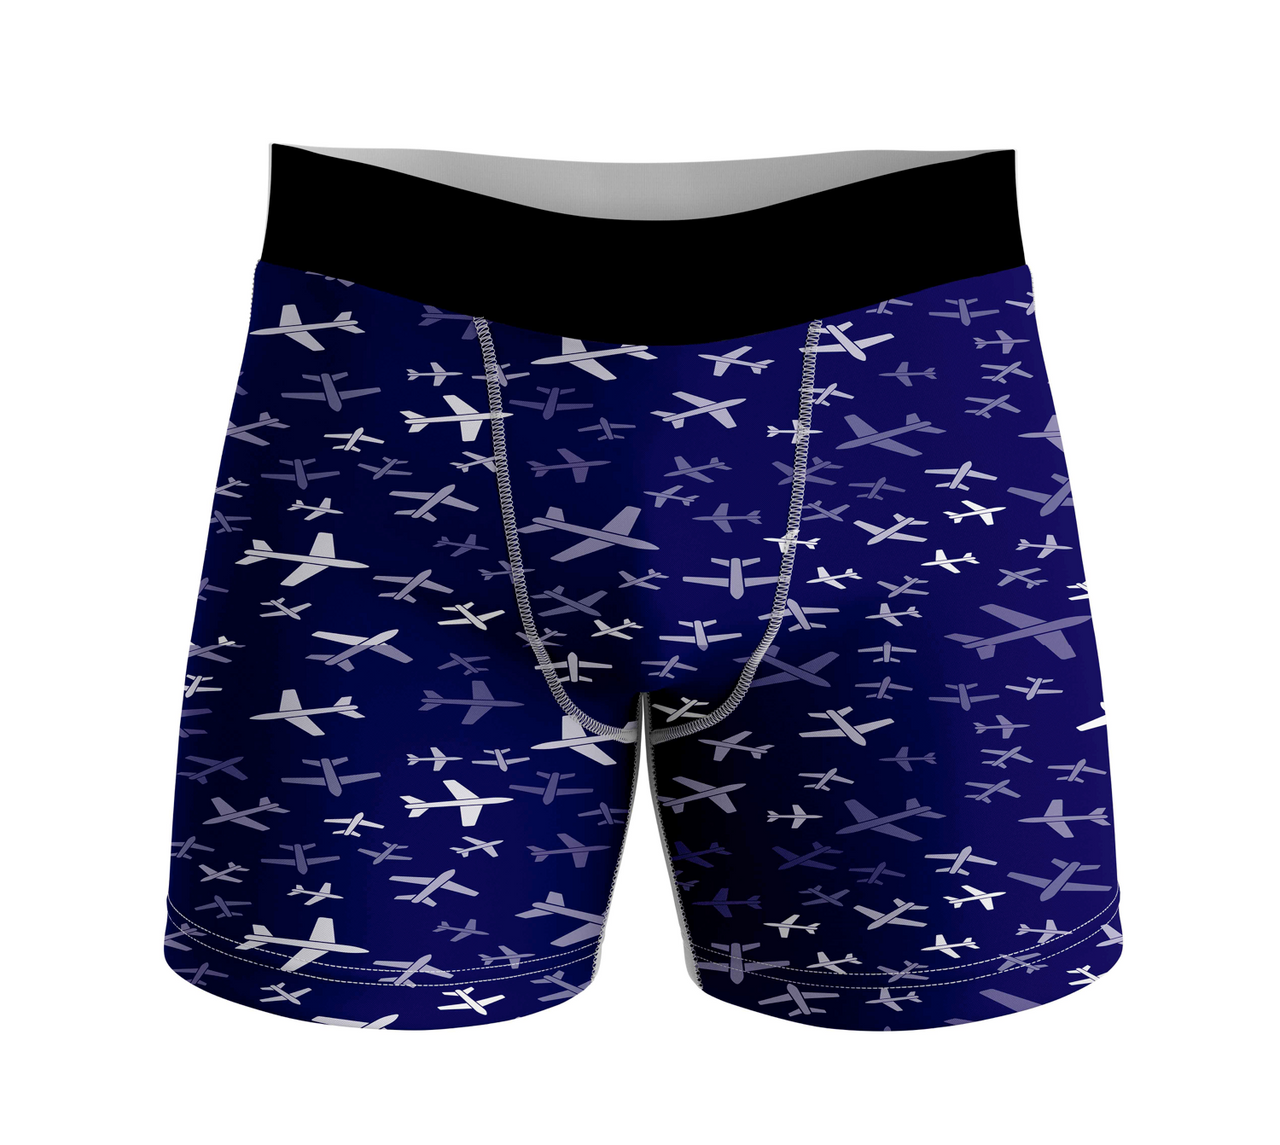 Different Sizes Seamless Airplanes Designed Men Boxers